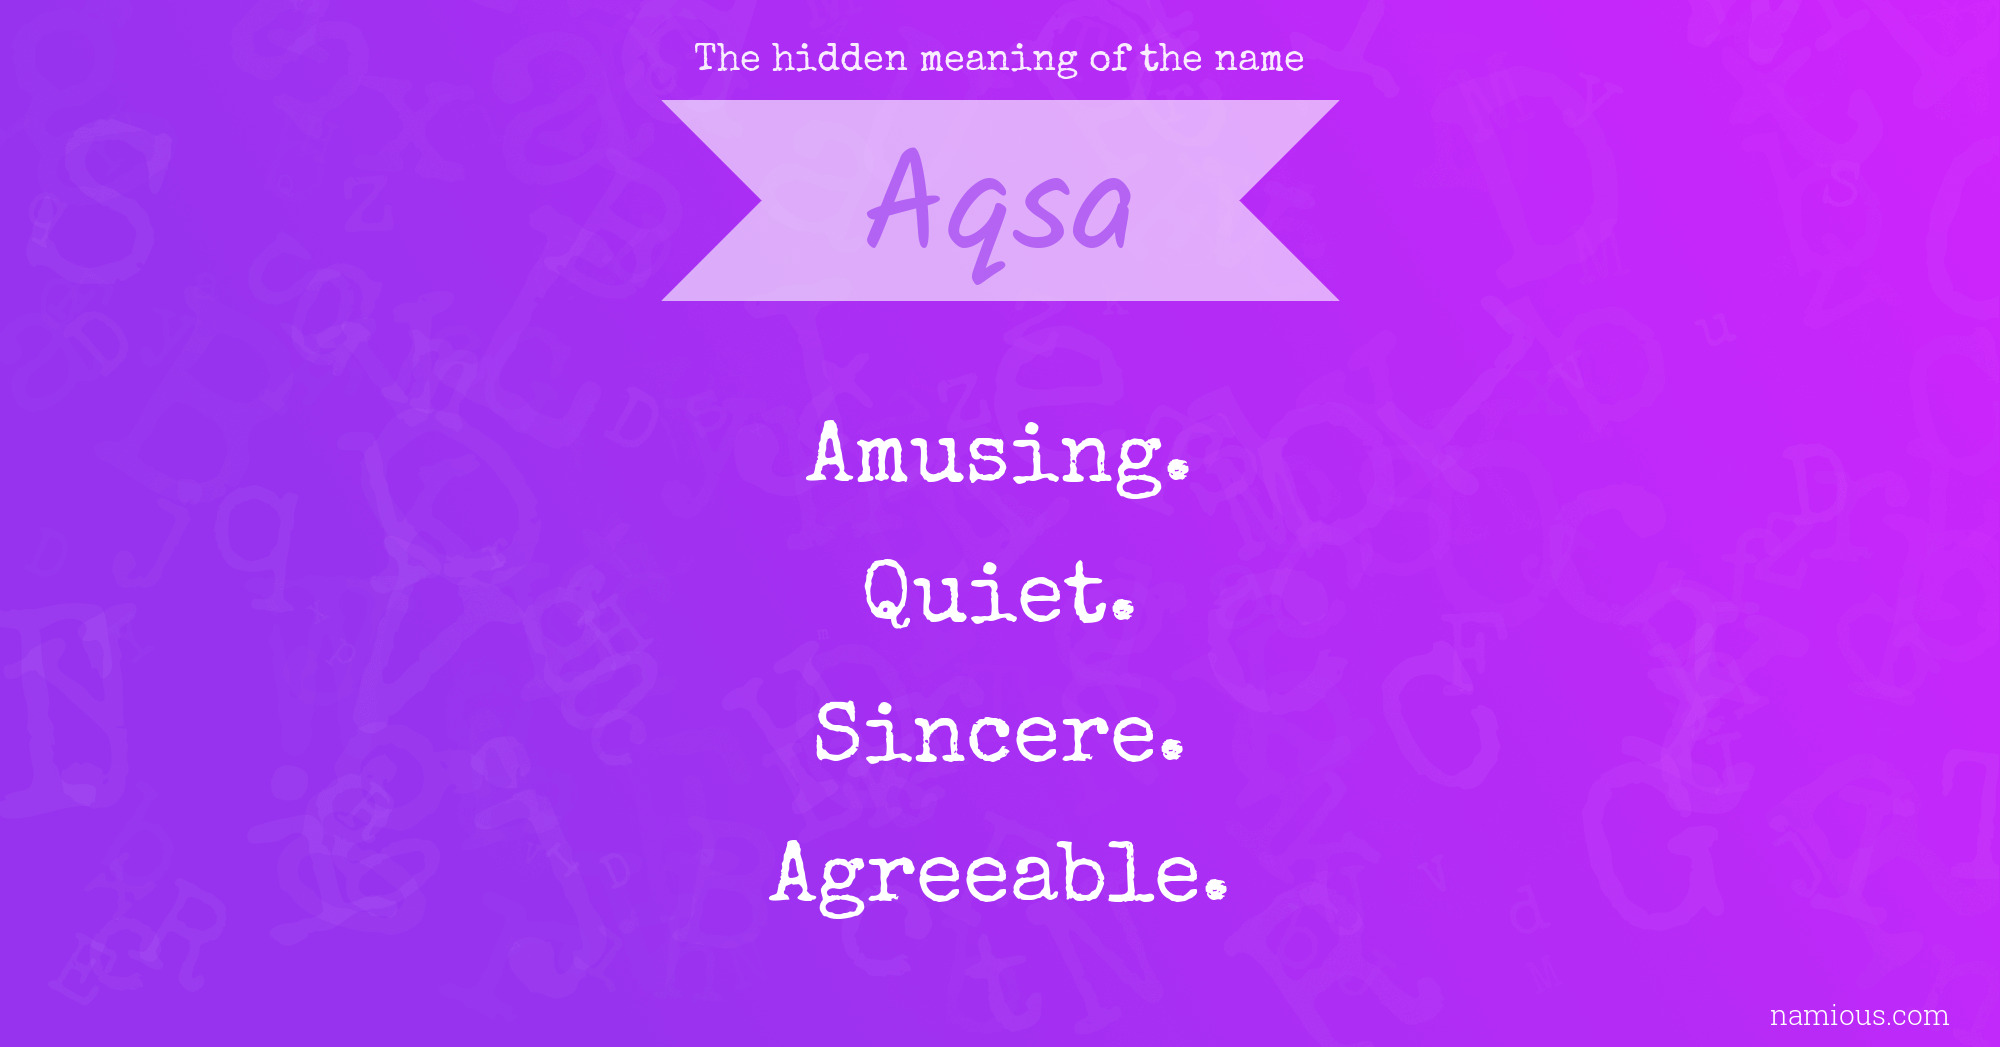 The hidden meaning of the name Aqsa